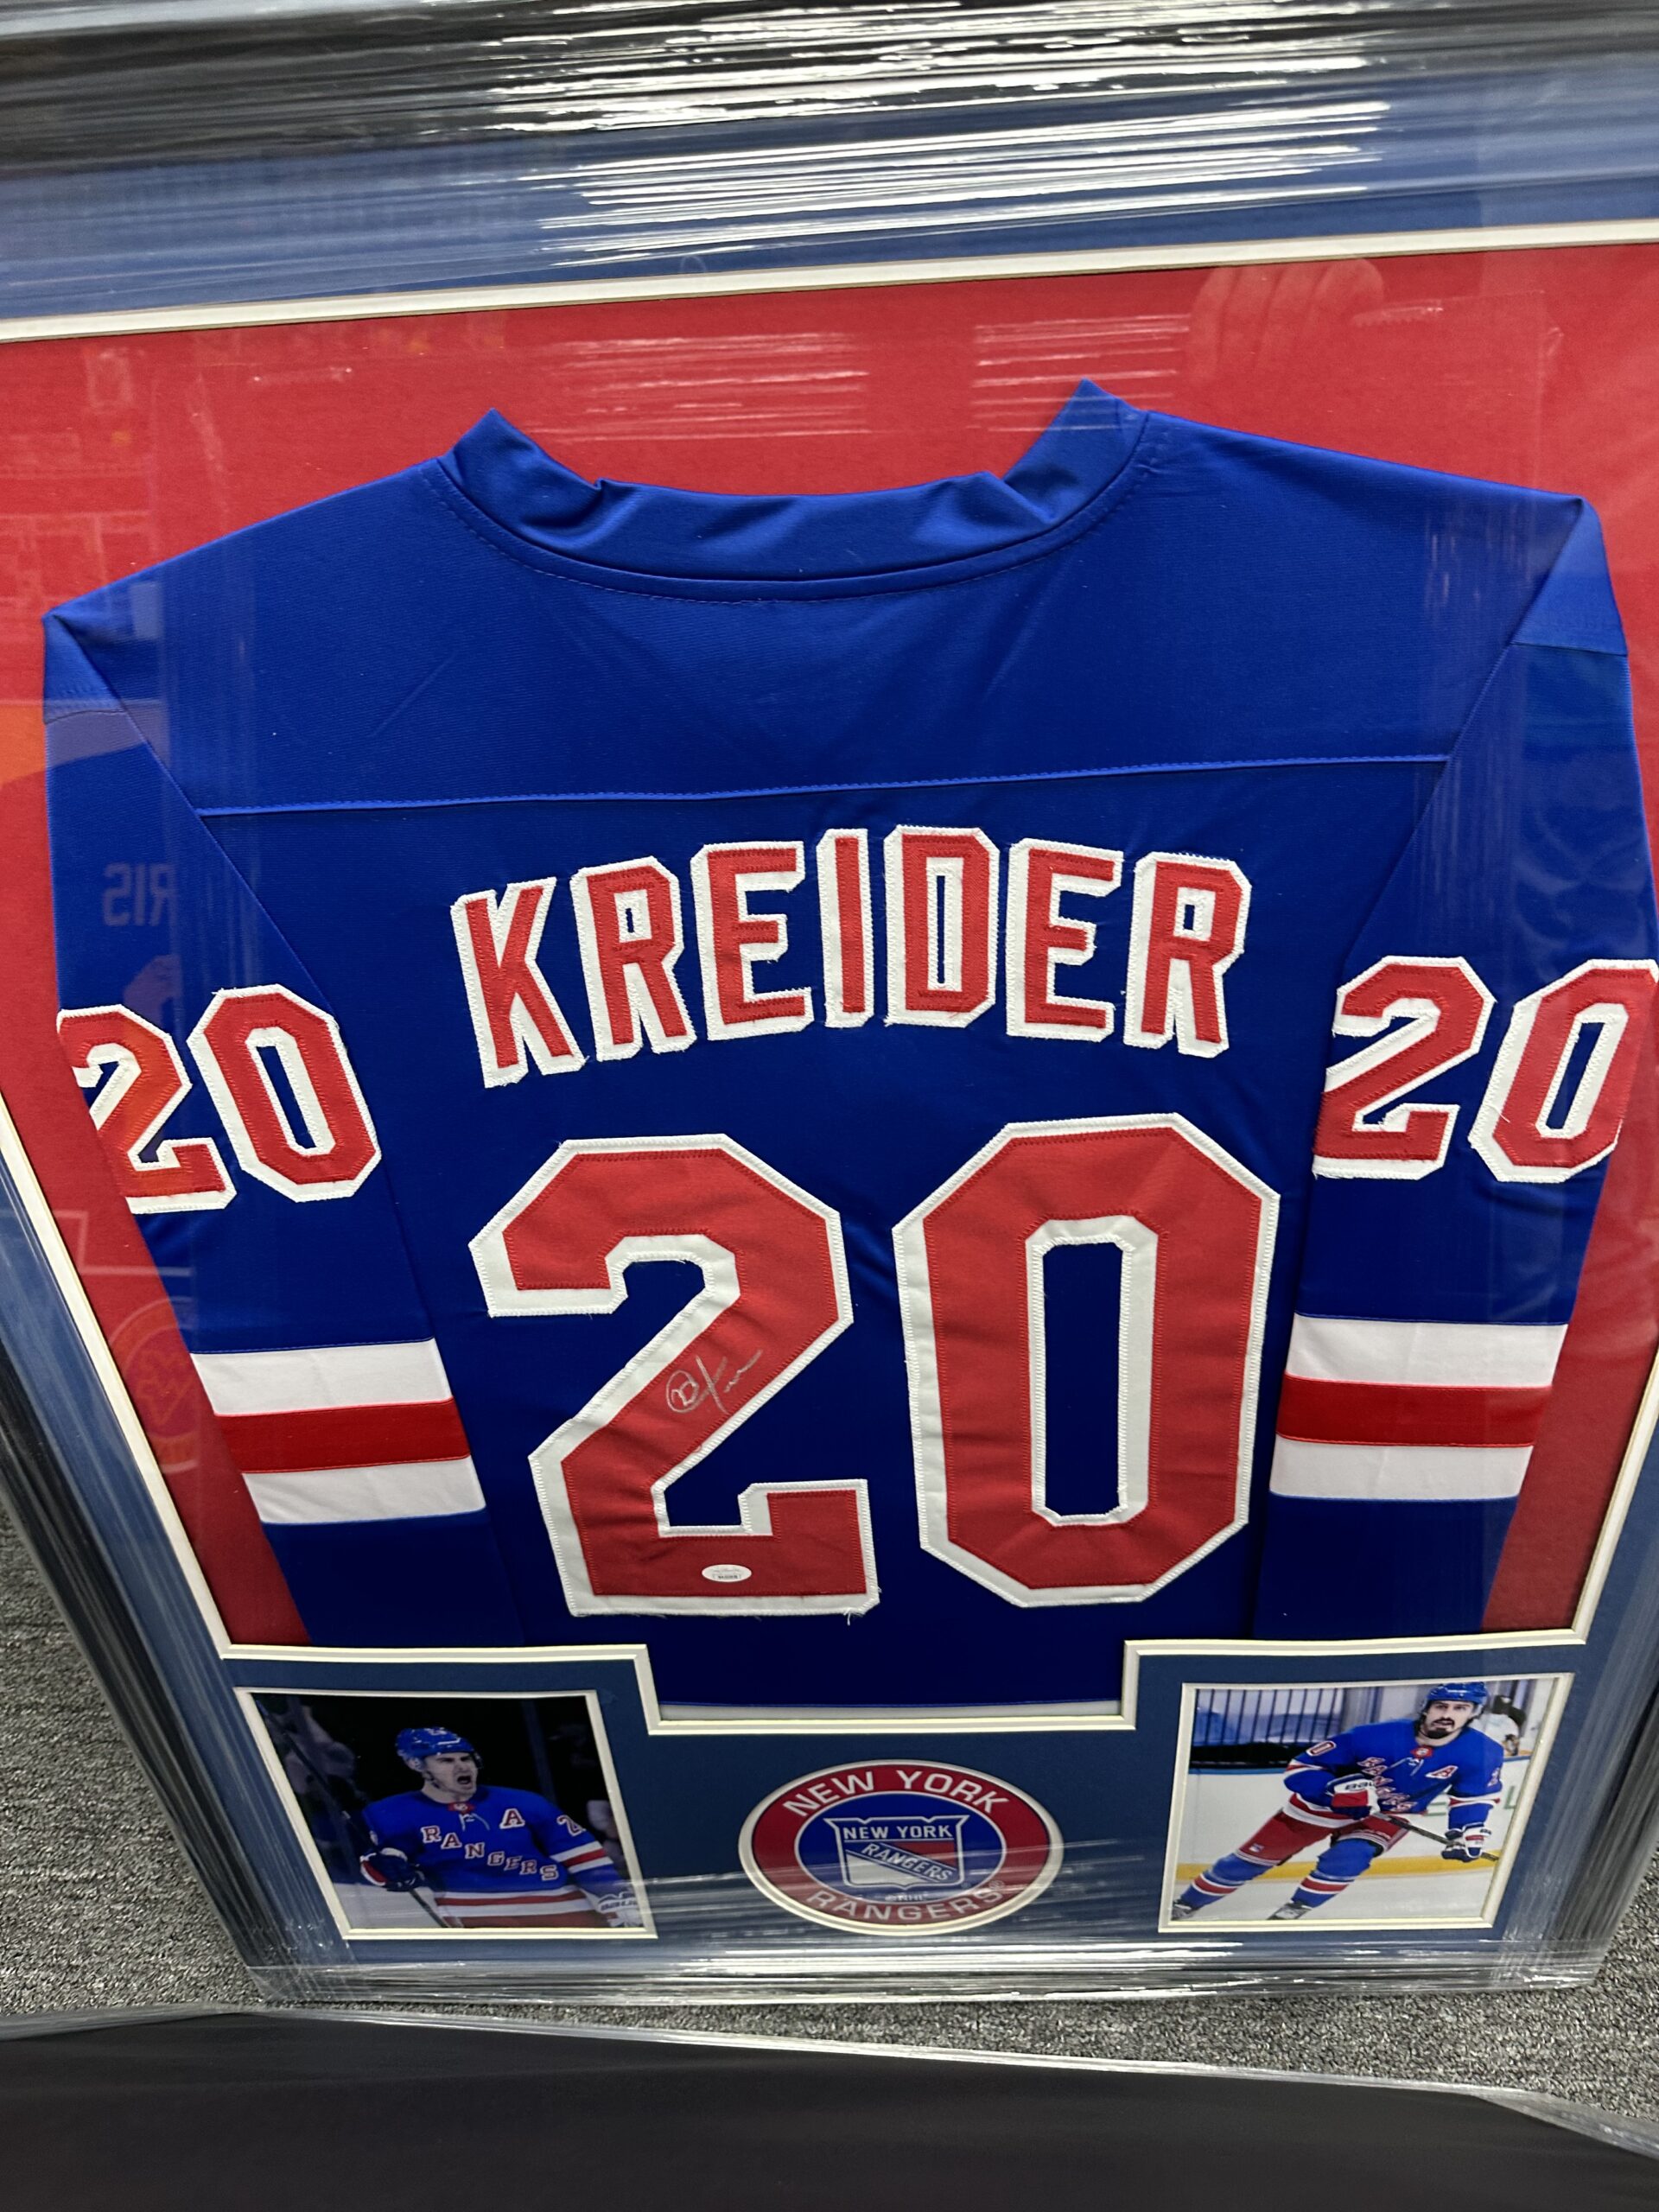 Chris Kreider signed framed jersey sports collectibles and memorabilia